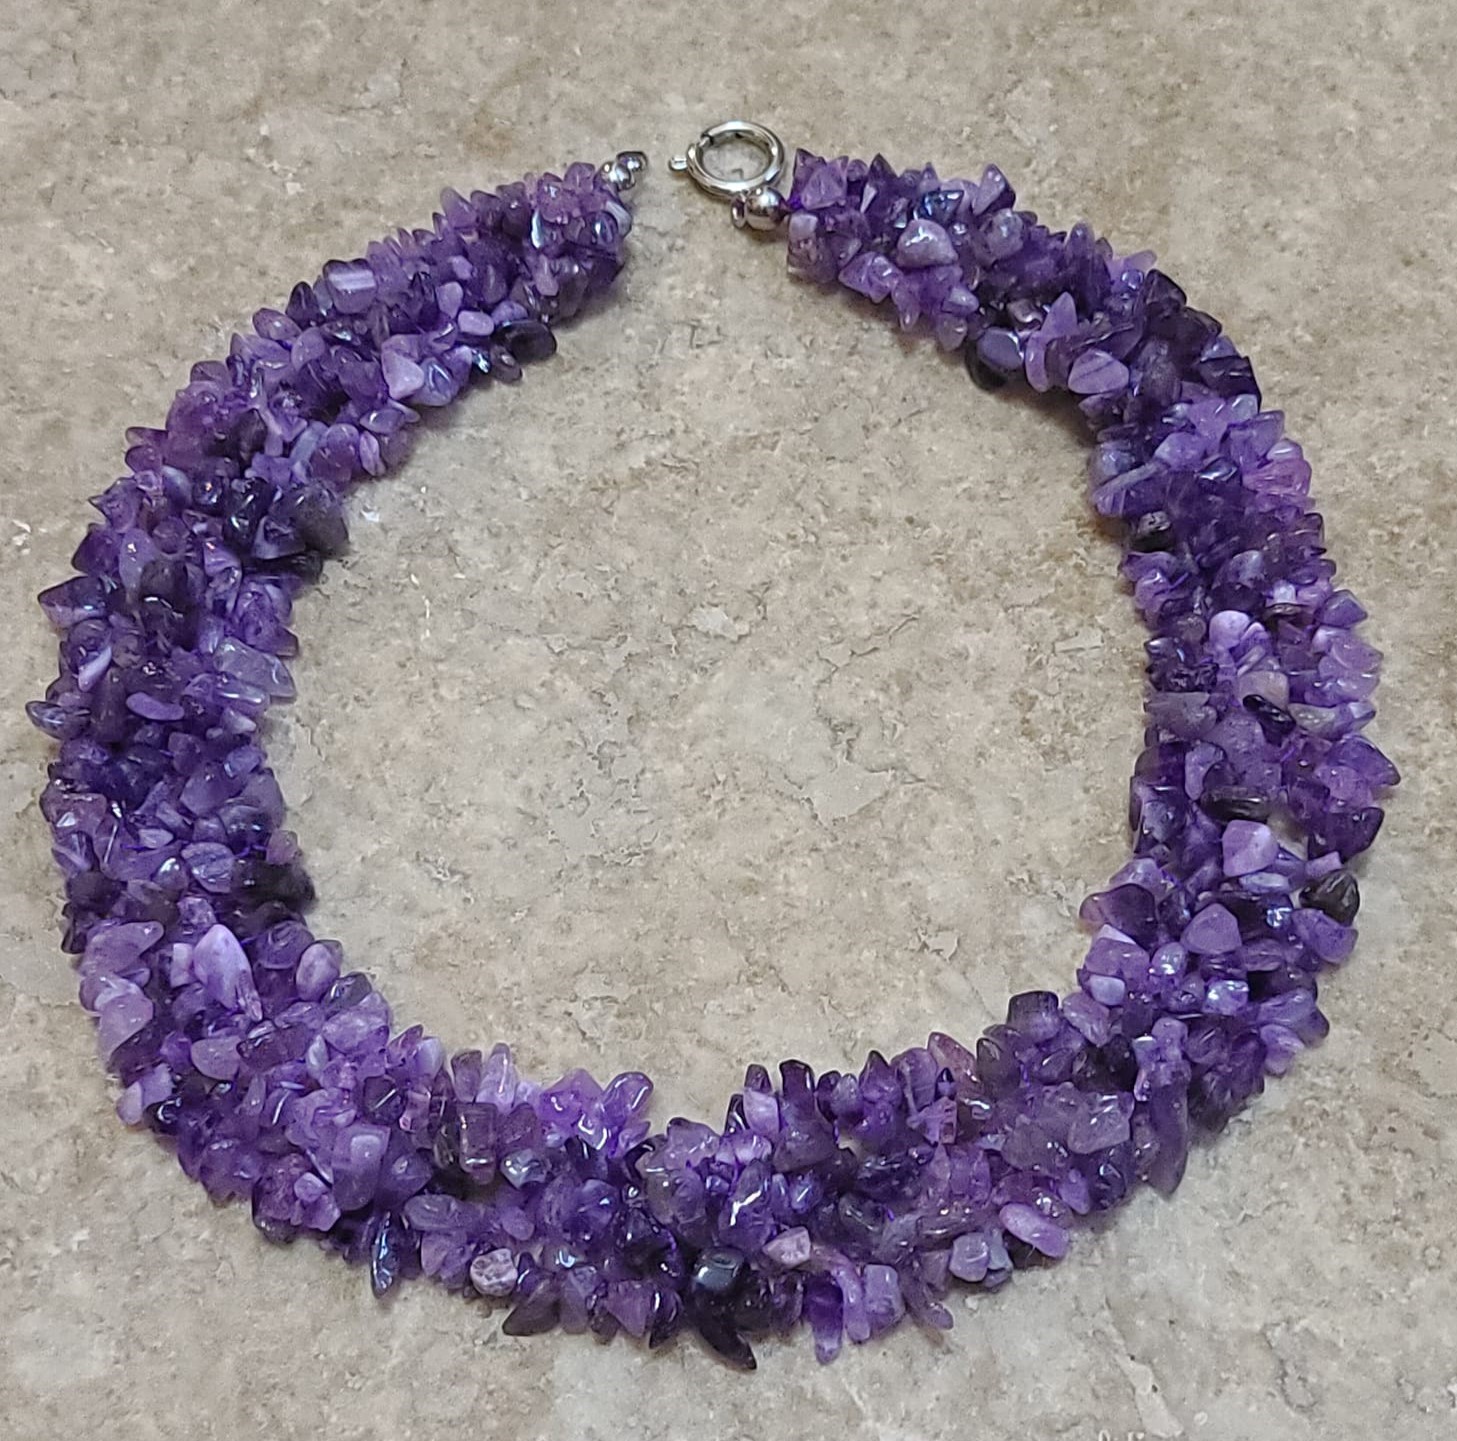 Amethyst Gemstone Interwoven Cleopatra Necklace 19" - Click Image to Close